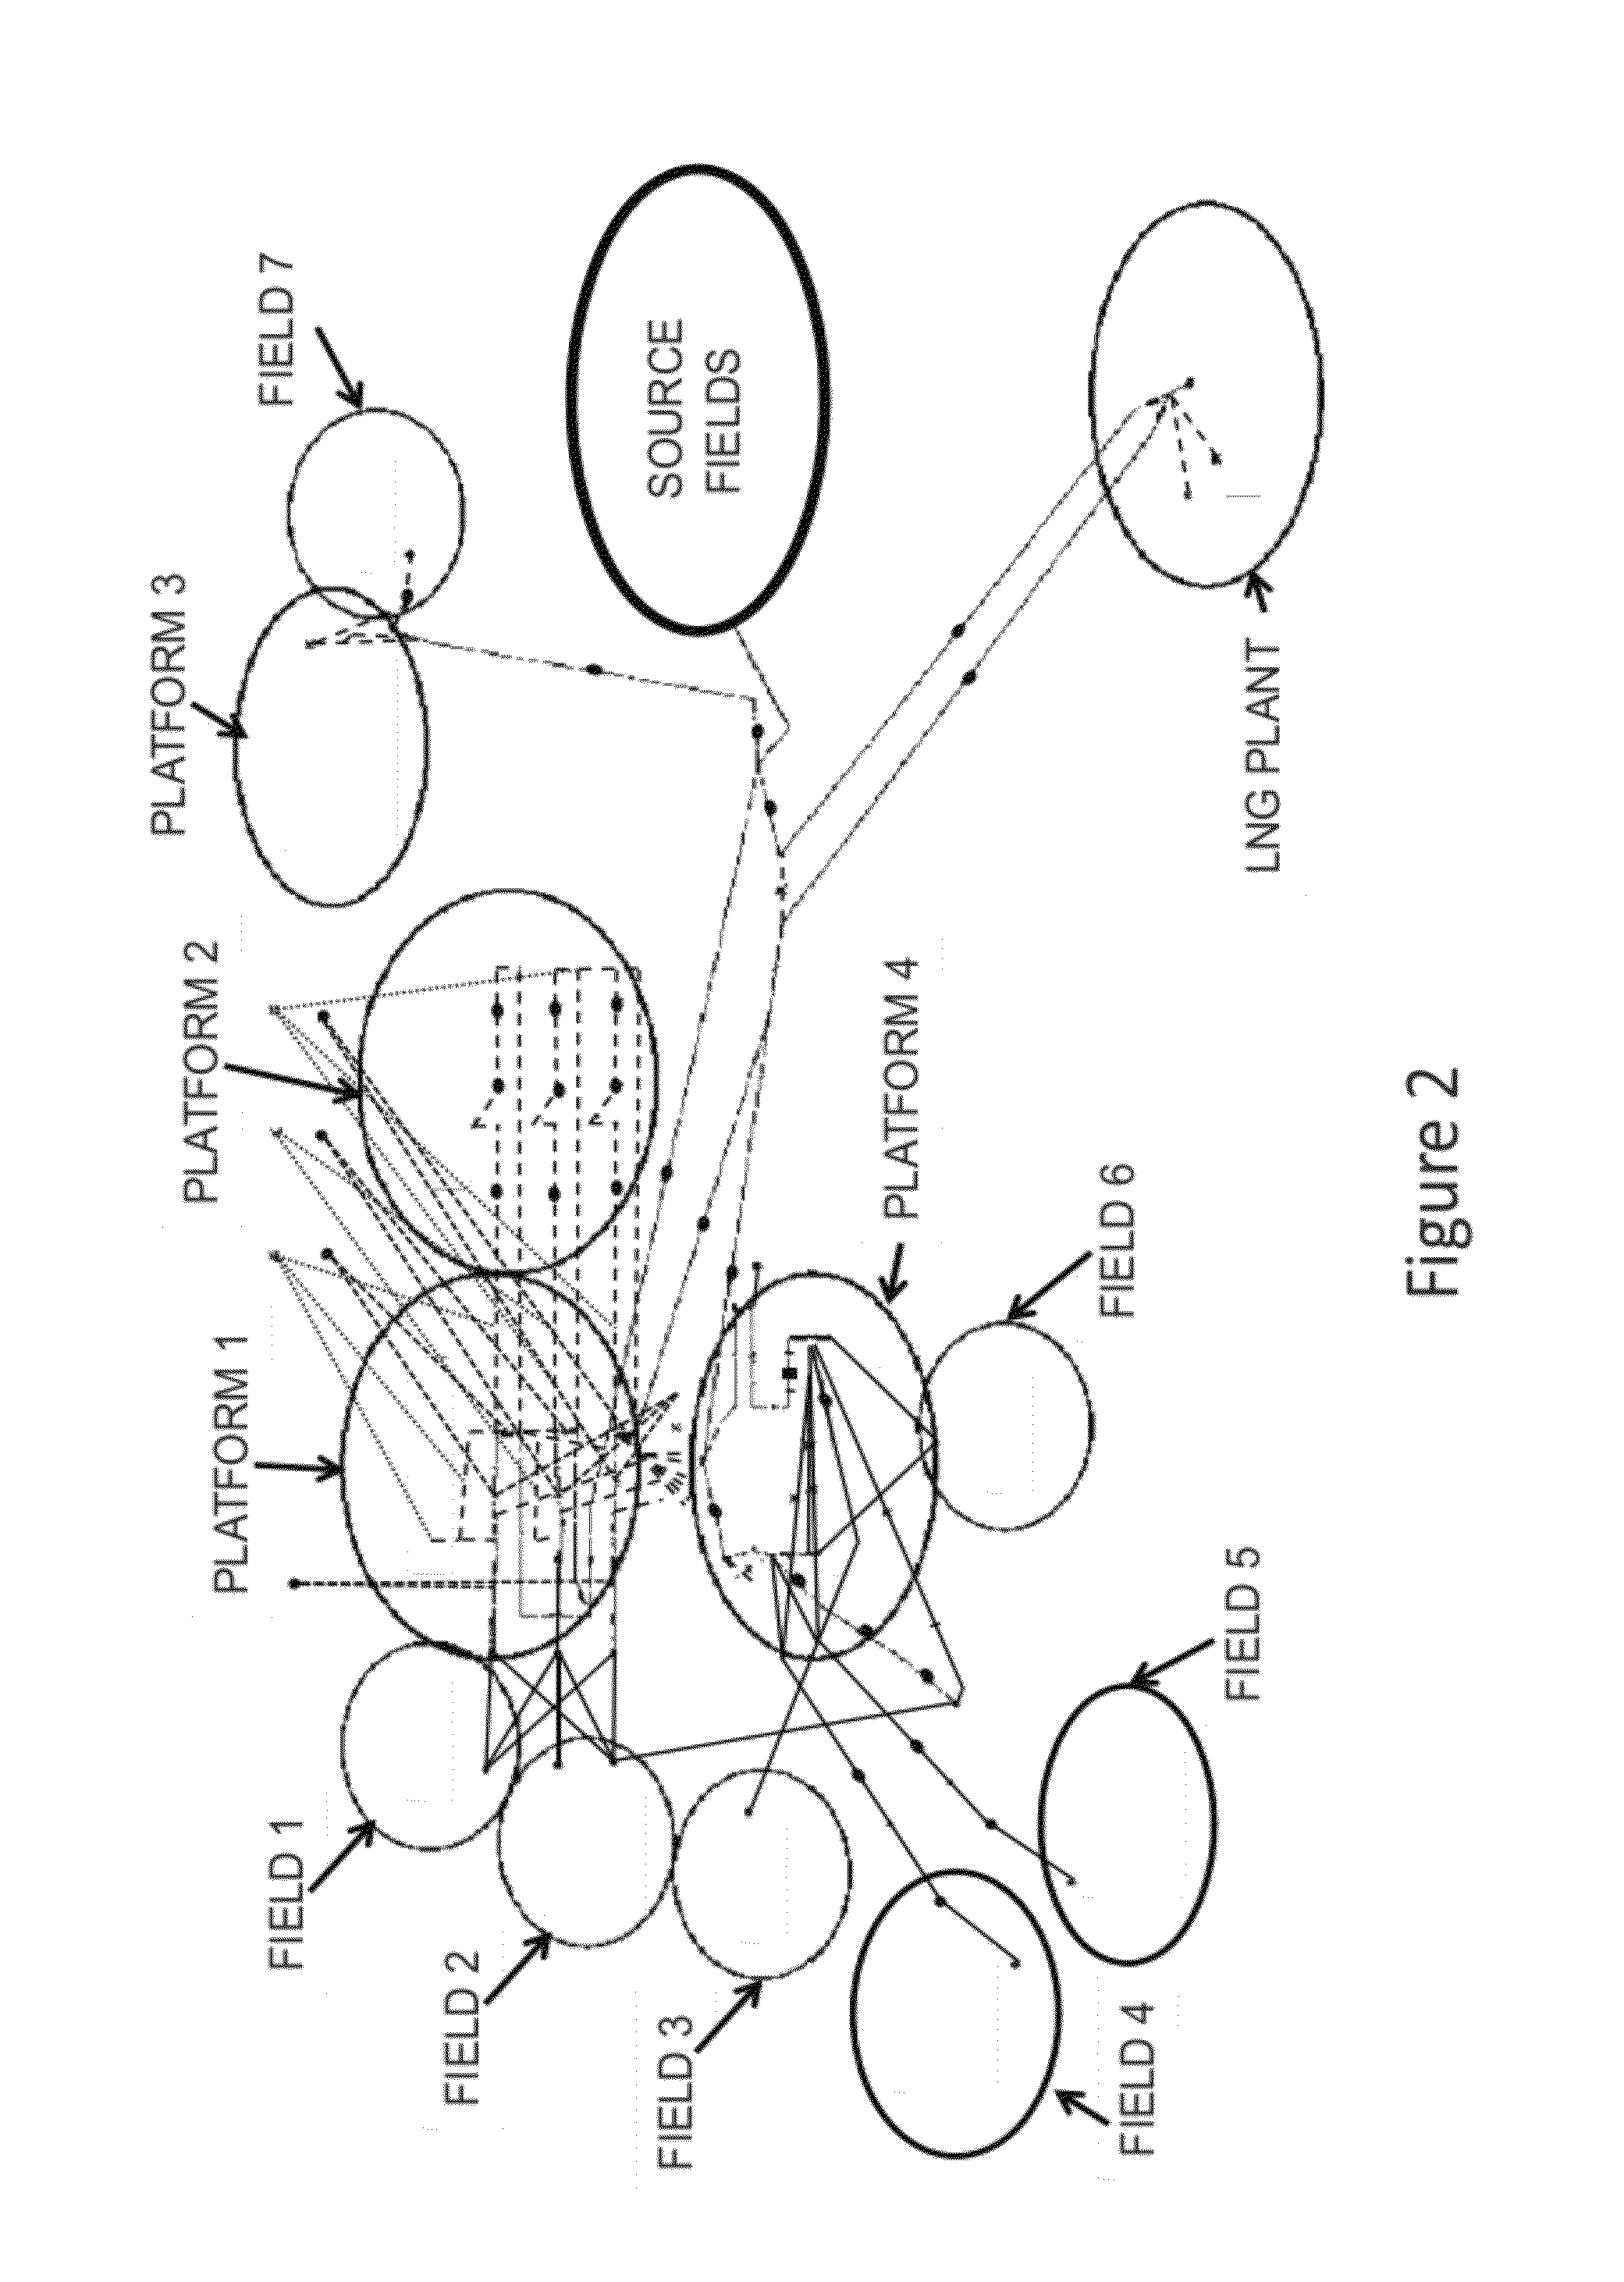 System and method for hydrocarbon production forecasting